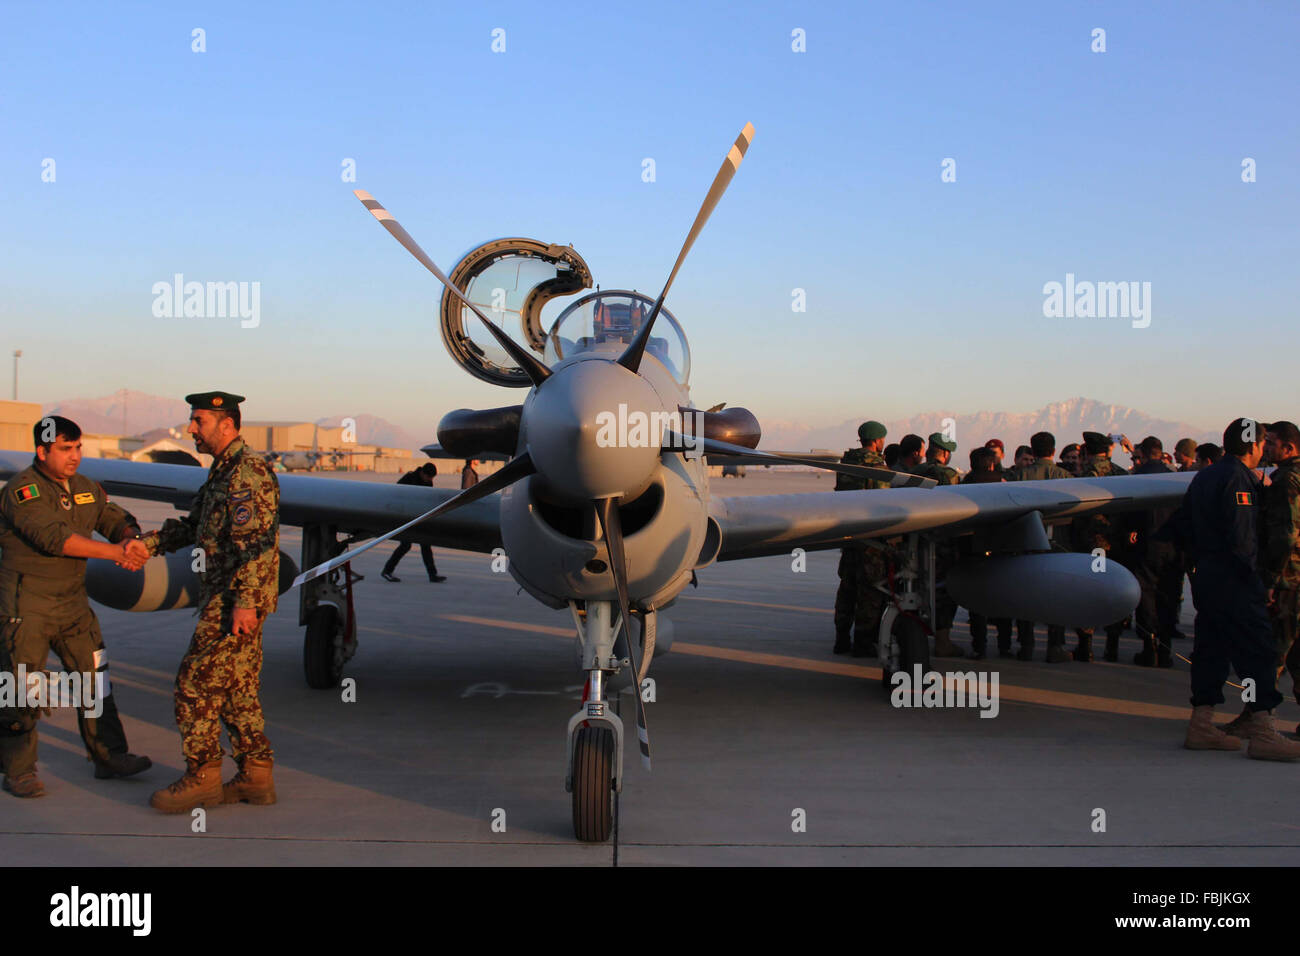 KABUL AFGFHANISTAN,JAN 15,2016  Afghan National Army Officials stand near to A-29 Super Tucano aircrafts during a ceremony in Kabul, Afghanistan on Friday January 15, 2016. U.S officials formally delivered four Brazil-made Super Tucano attack aircraft to the Afghan defense ministry on Friday in an effort to help embattled Afghan security forces carry out their counter-insurgency missions in the volatile country in days to come. Stock Photo